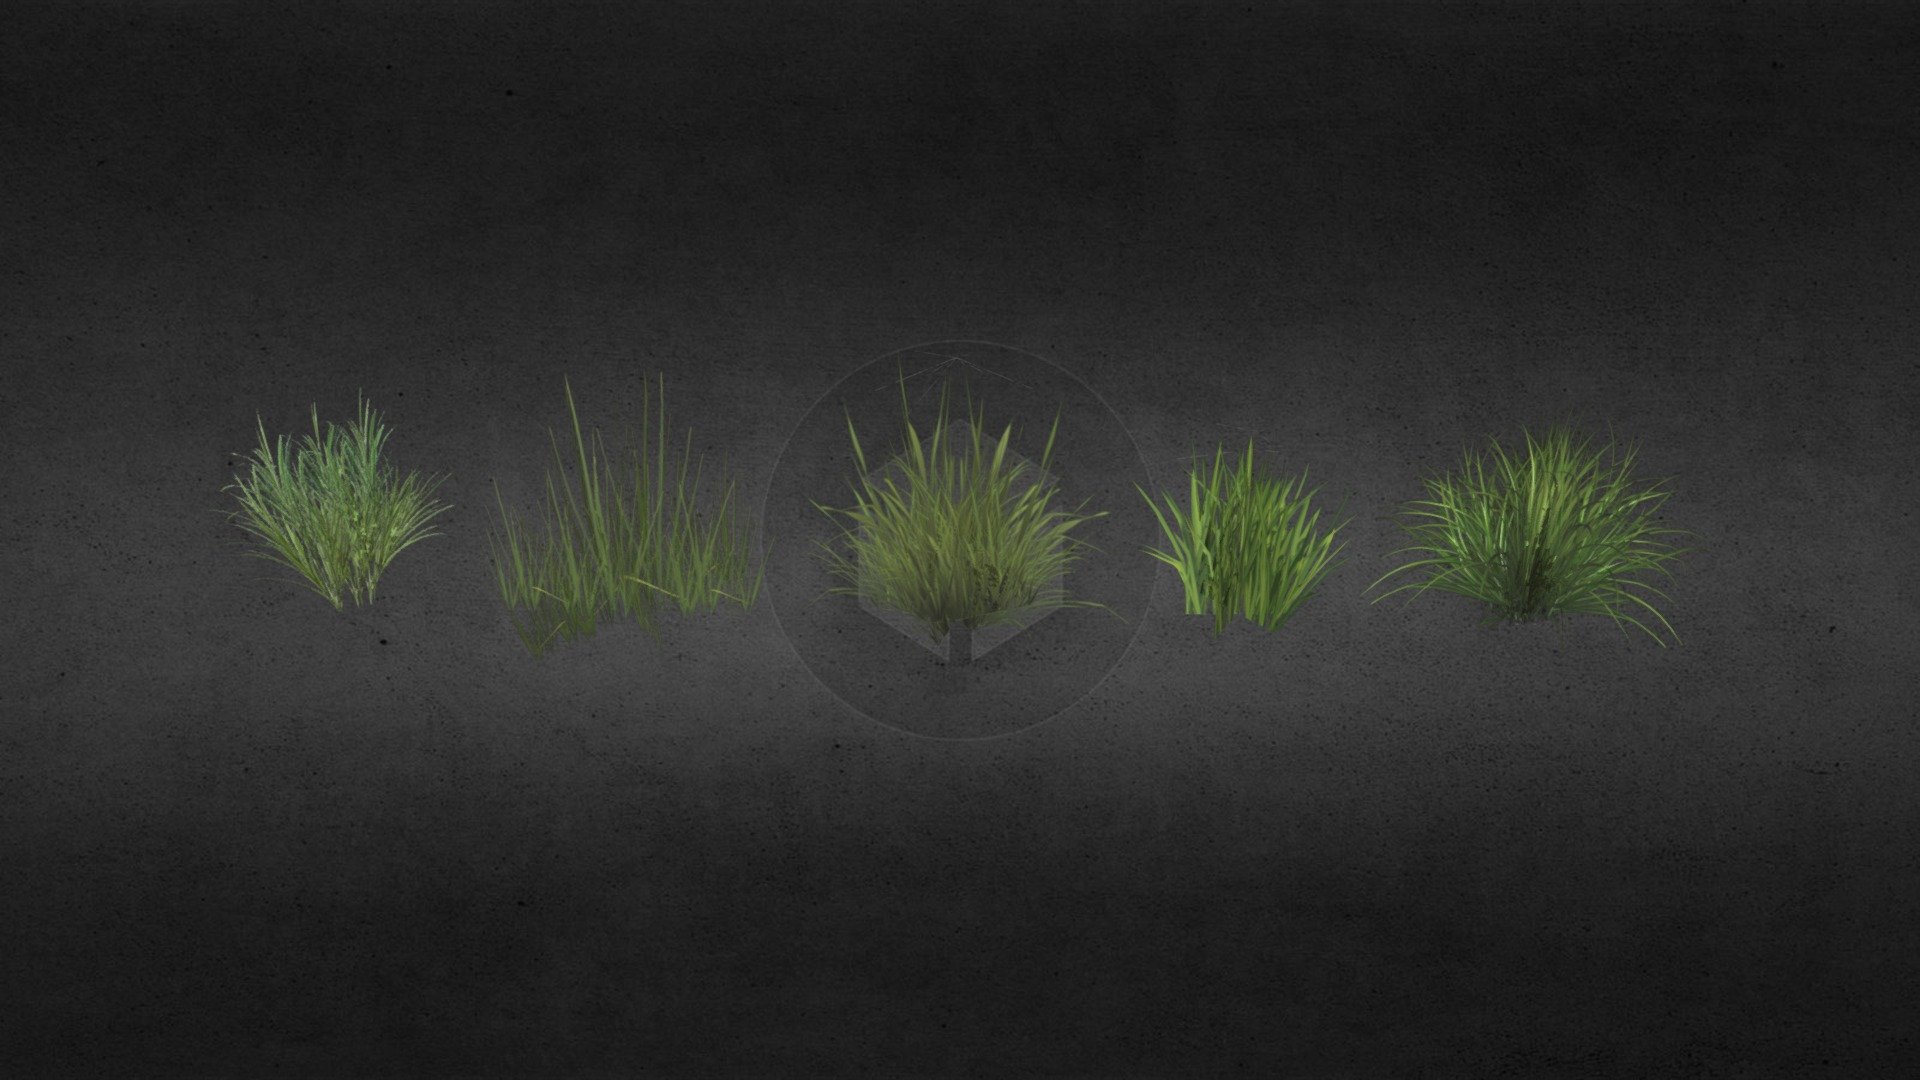 Grass is a type of bulb plant. A common kind of grass is used to cover the ground in a lawn and other places. The true grasses include cereals, bamboo and the grasses of lawns (turf) and grassland. Uses for graminoids include food (as grain, sprouted grain, shoots or rhizomes), drink (beer, whisky), pasture for livestock, thatching thatch, paper, fuel, clothing, insulation, construction, sports turf, basket weaving and many others. [Wiki]



The set includes 5 lowpoly models of grass.

All models have own transperent texture.

Trips: 72 (all set) Polygons: 36 Verts : 103.

Made in Blender v2.79
 - Grass kits pack - Buy Royalty Free 3D model by adam127 3d model